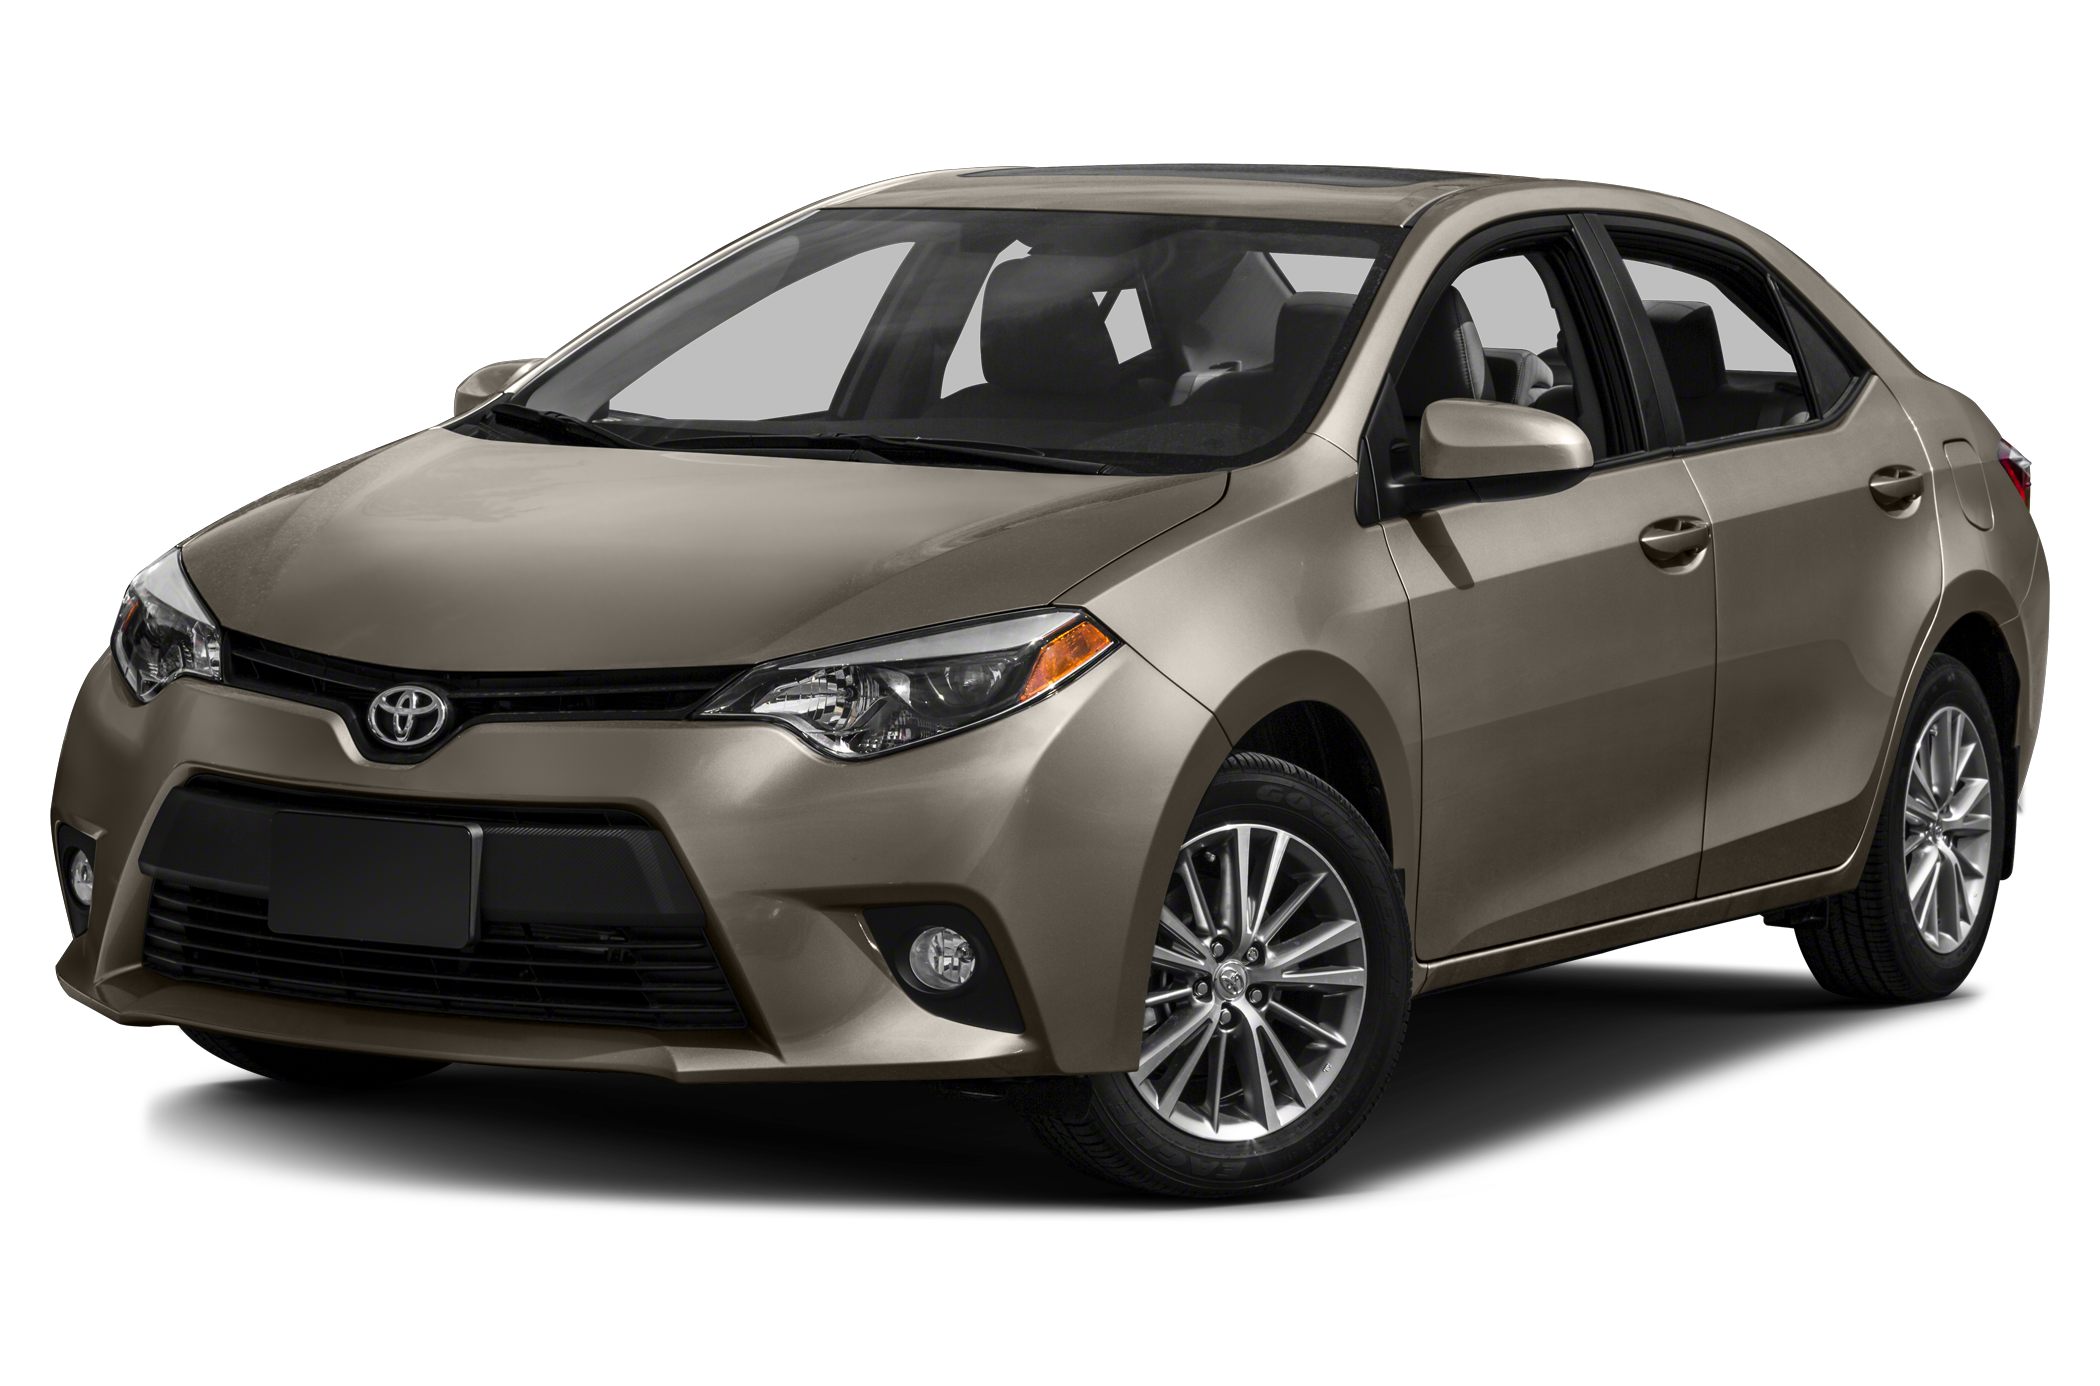 Toyota Corolla 2013., 11th generation of the best selling car in